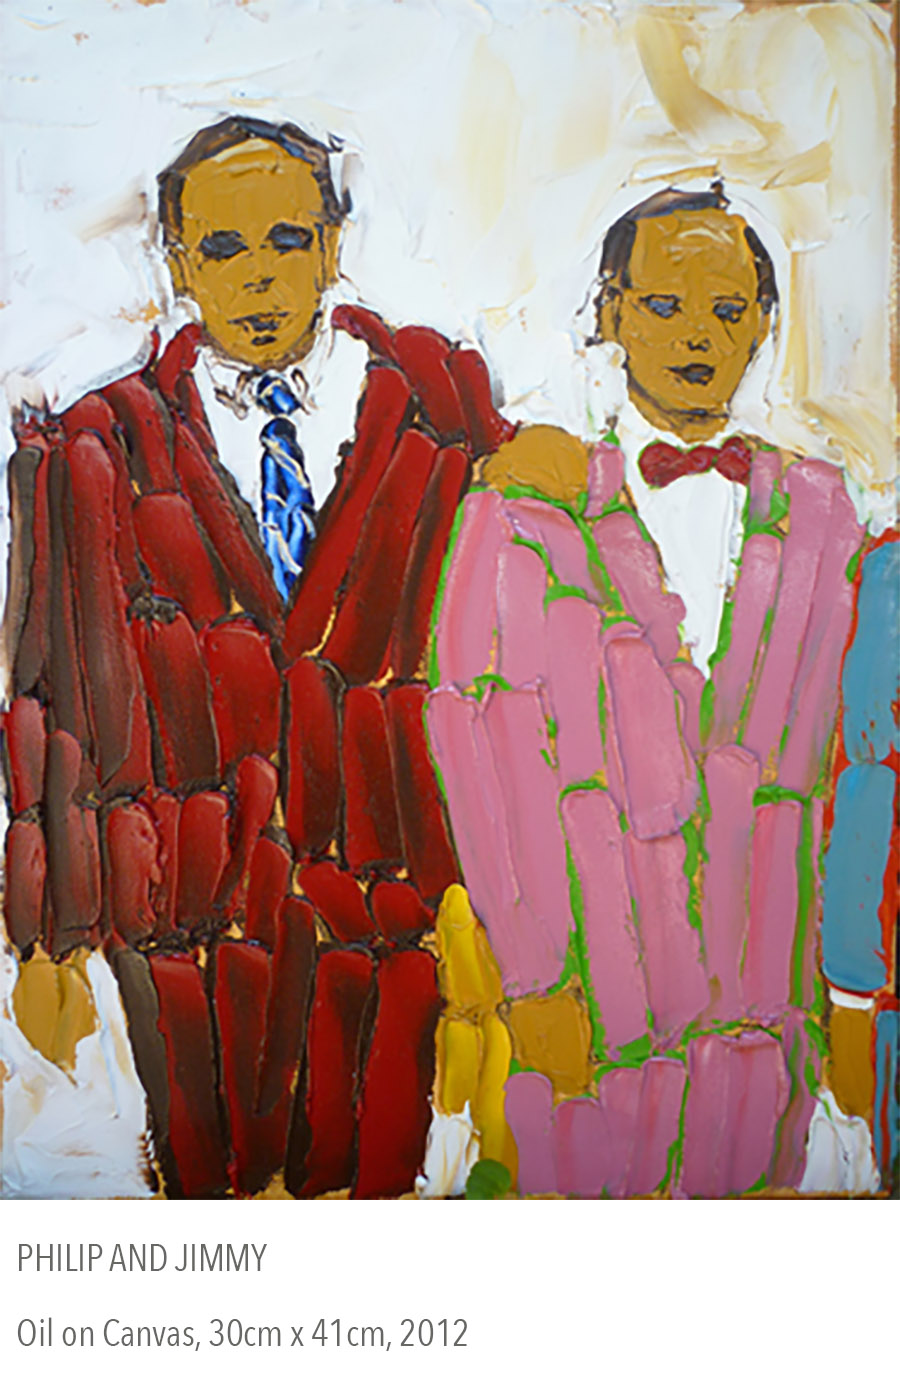 2012 oil painting called Philip and Jimmy